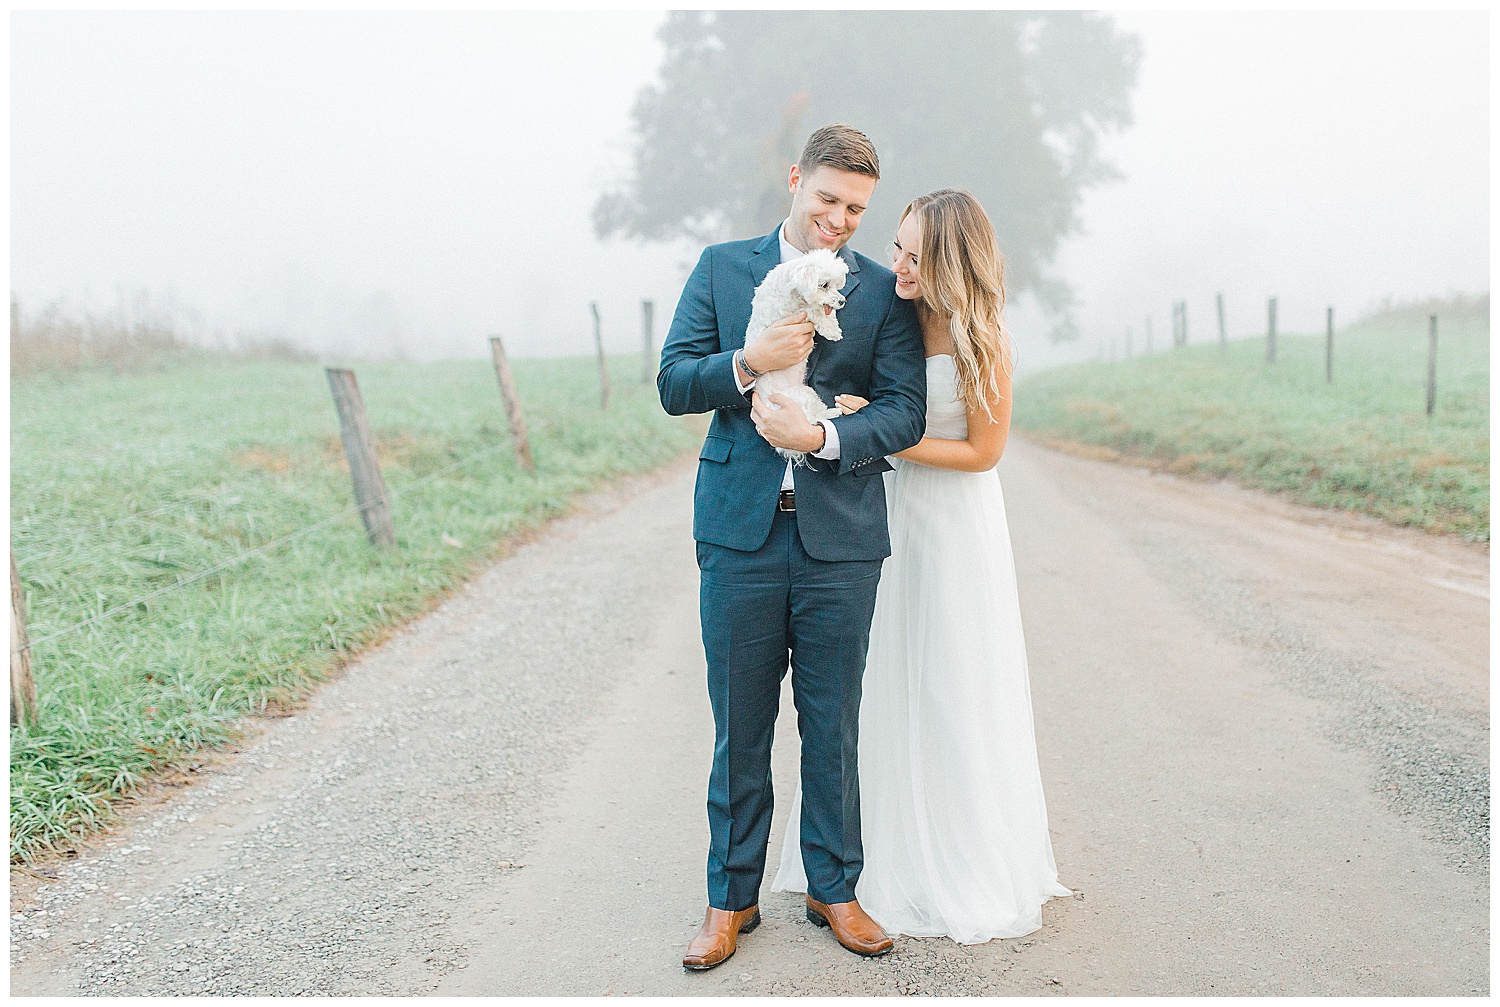 Emma Rose Company recently got to travel all the way to Nashville to photograph the most beautiful post-wedding bride and groom portraits in the Great Smoky Mountains with a gorgeous couple! Nashville wedding inspiration at it's finest._0007.jpg